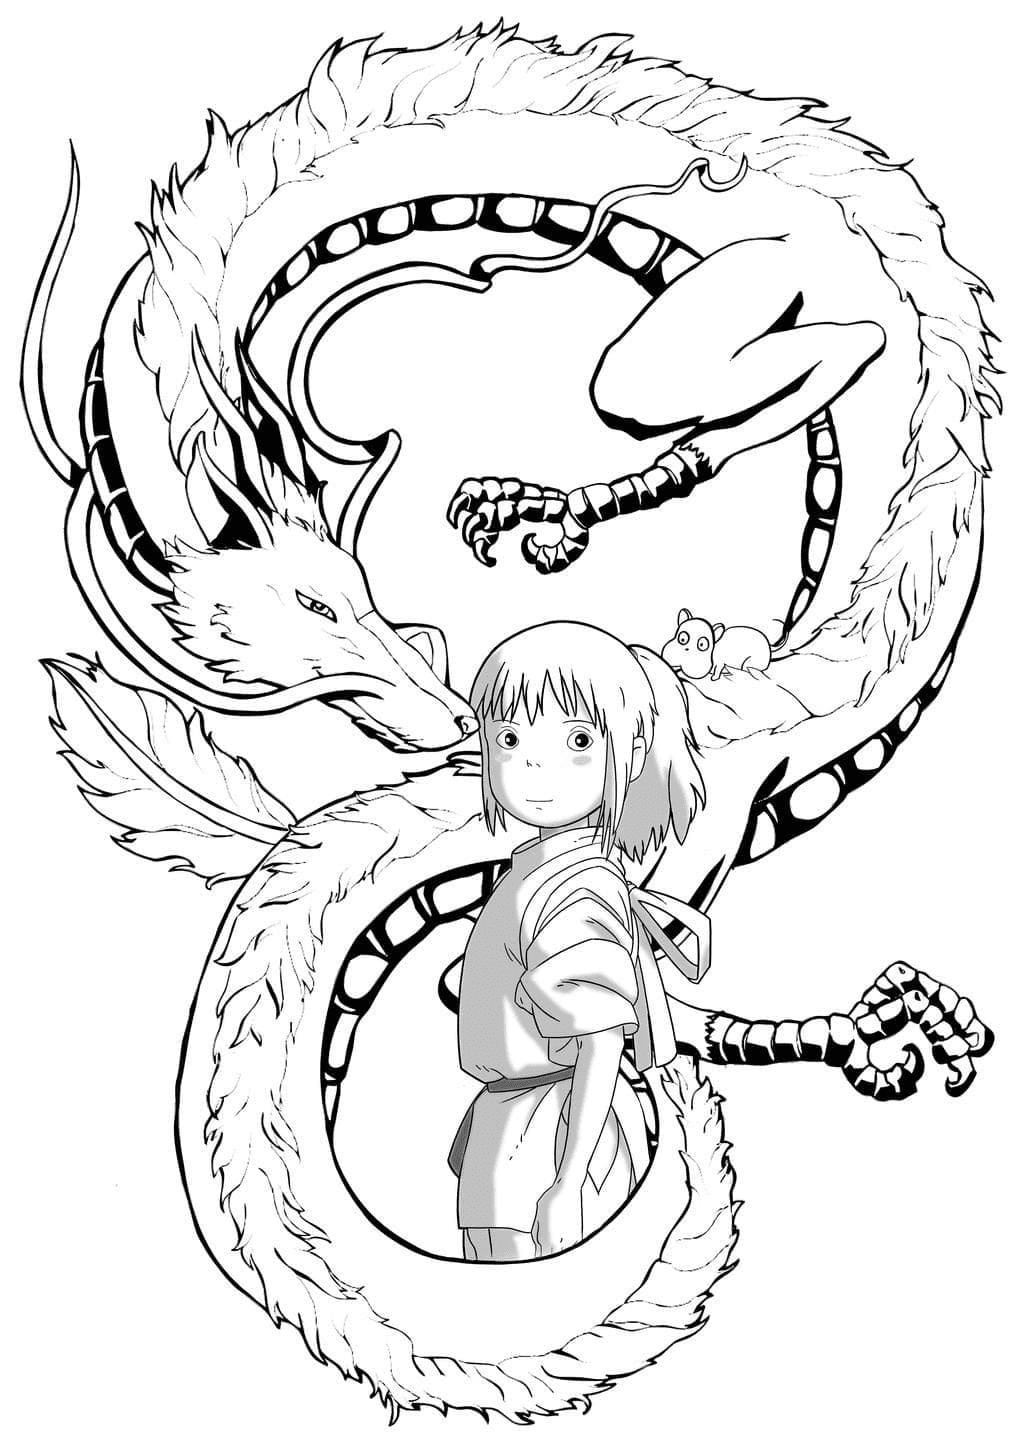 River Spirit and Chihiro from Spirited Away Coloring Page